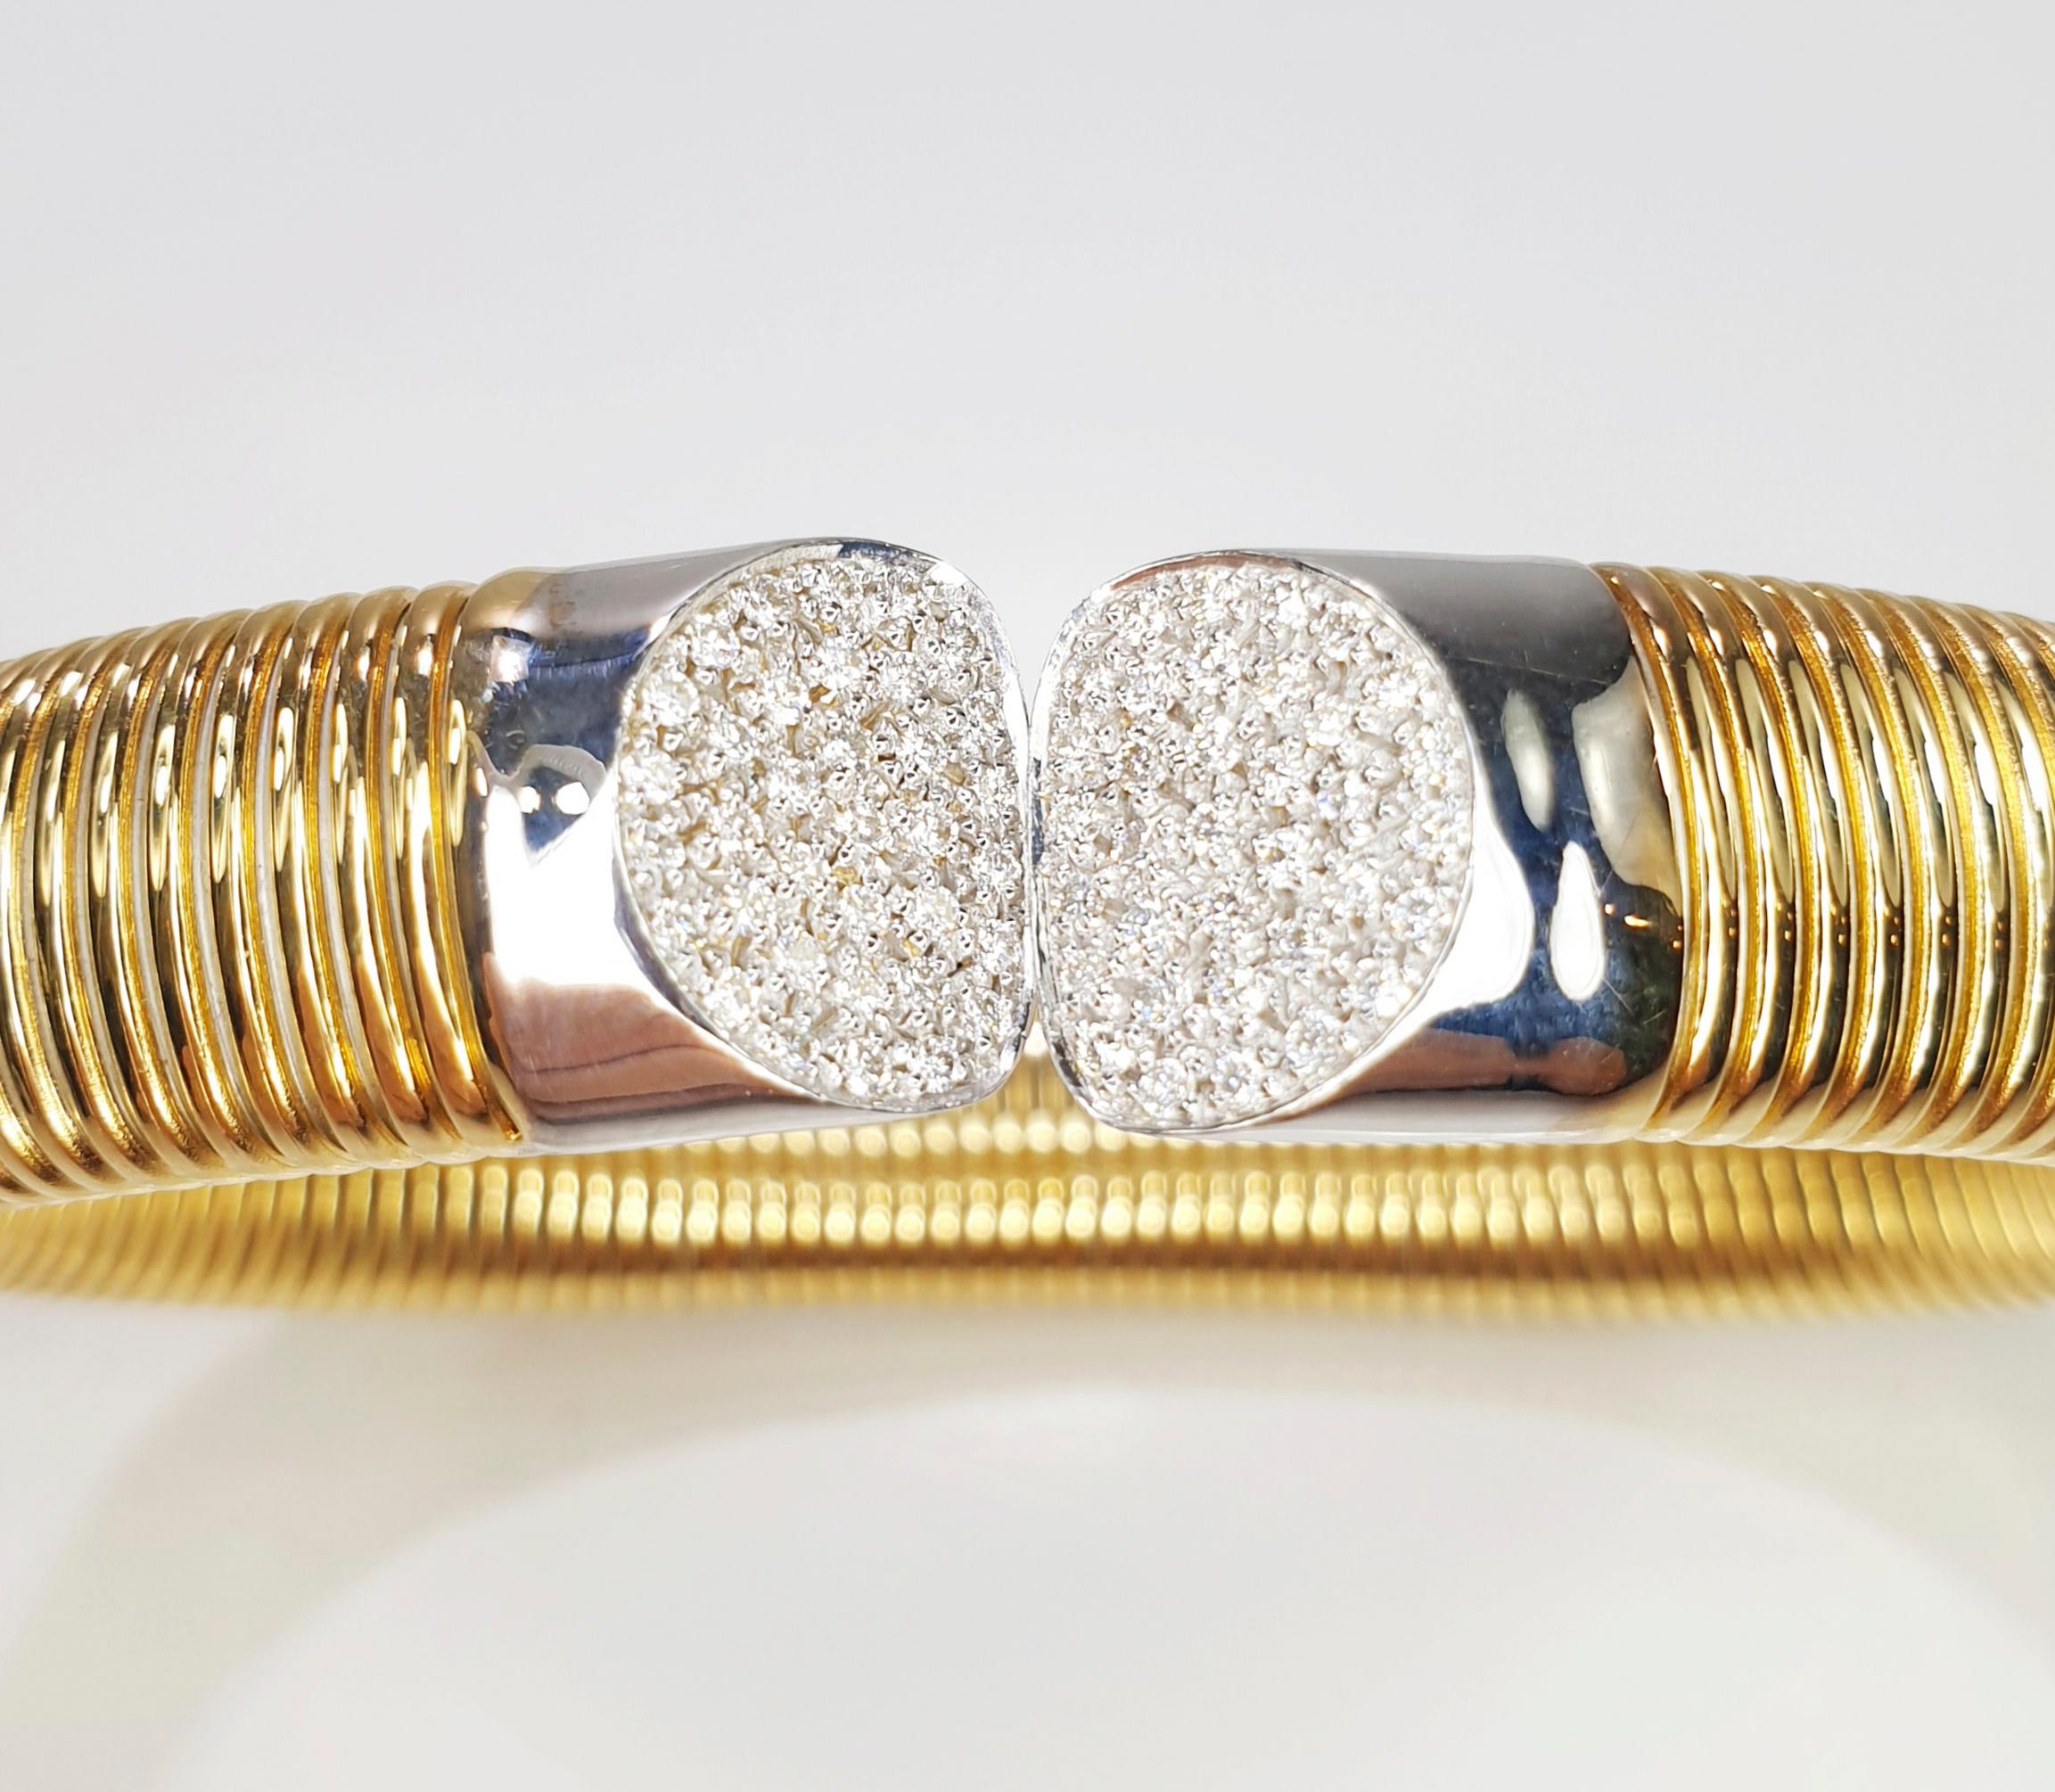 Antora Tubogas 18 Karat Rose Gold and Diamonds Diamond Bracelet
Flexible and adaptable bracelet with tubogas craftmanship that fits medium to large sizes.
Available in three colours of gold, yellow, white and rose.
25,10gr and 0.50Carat